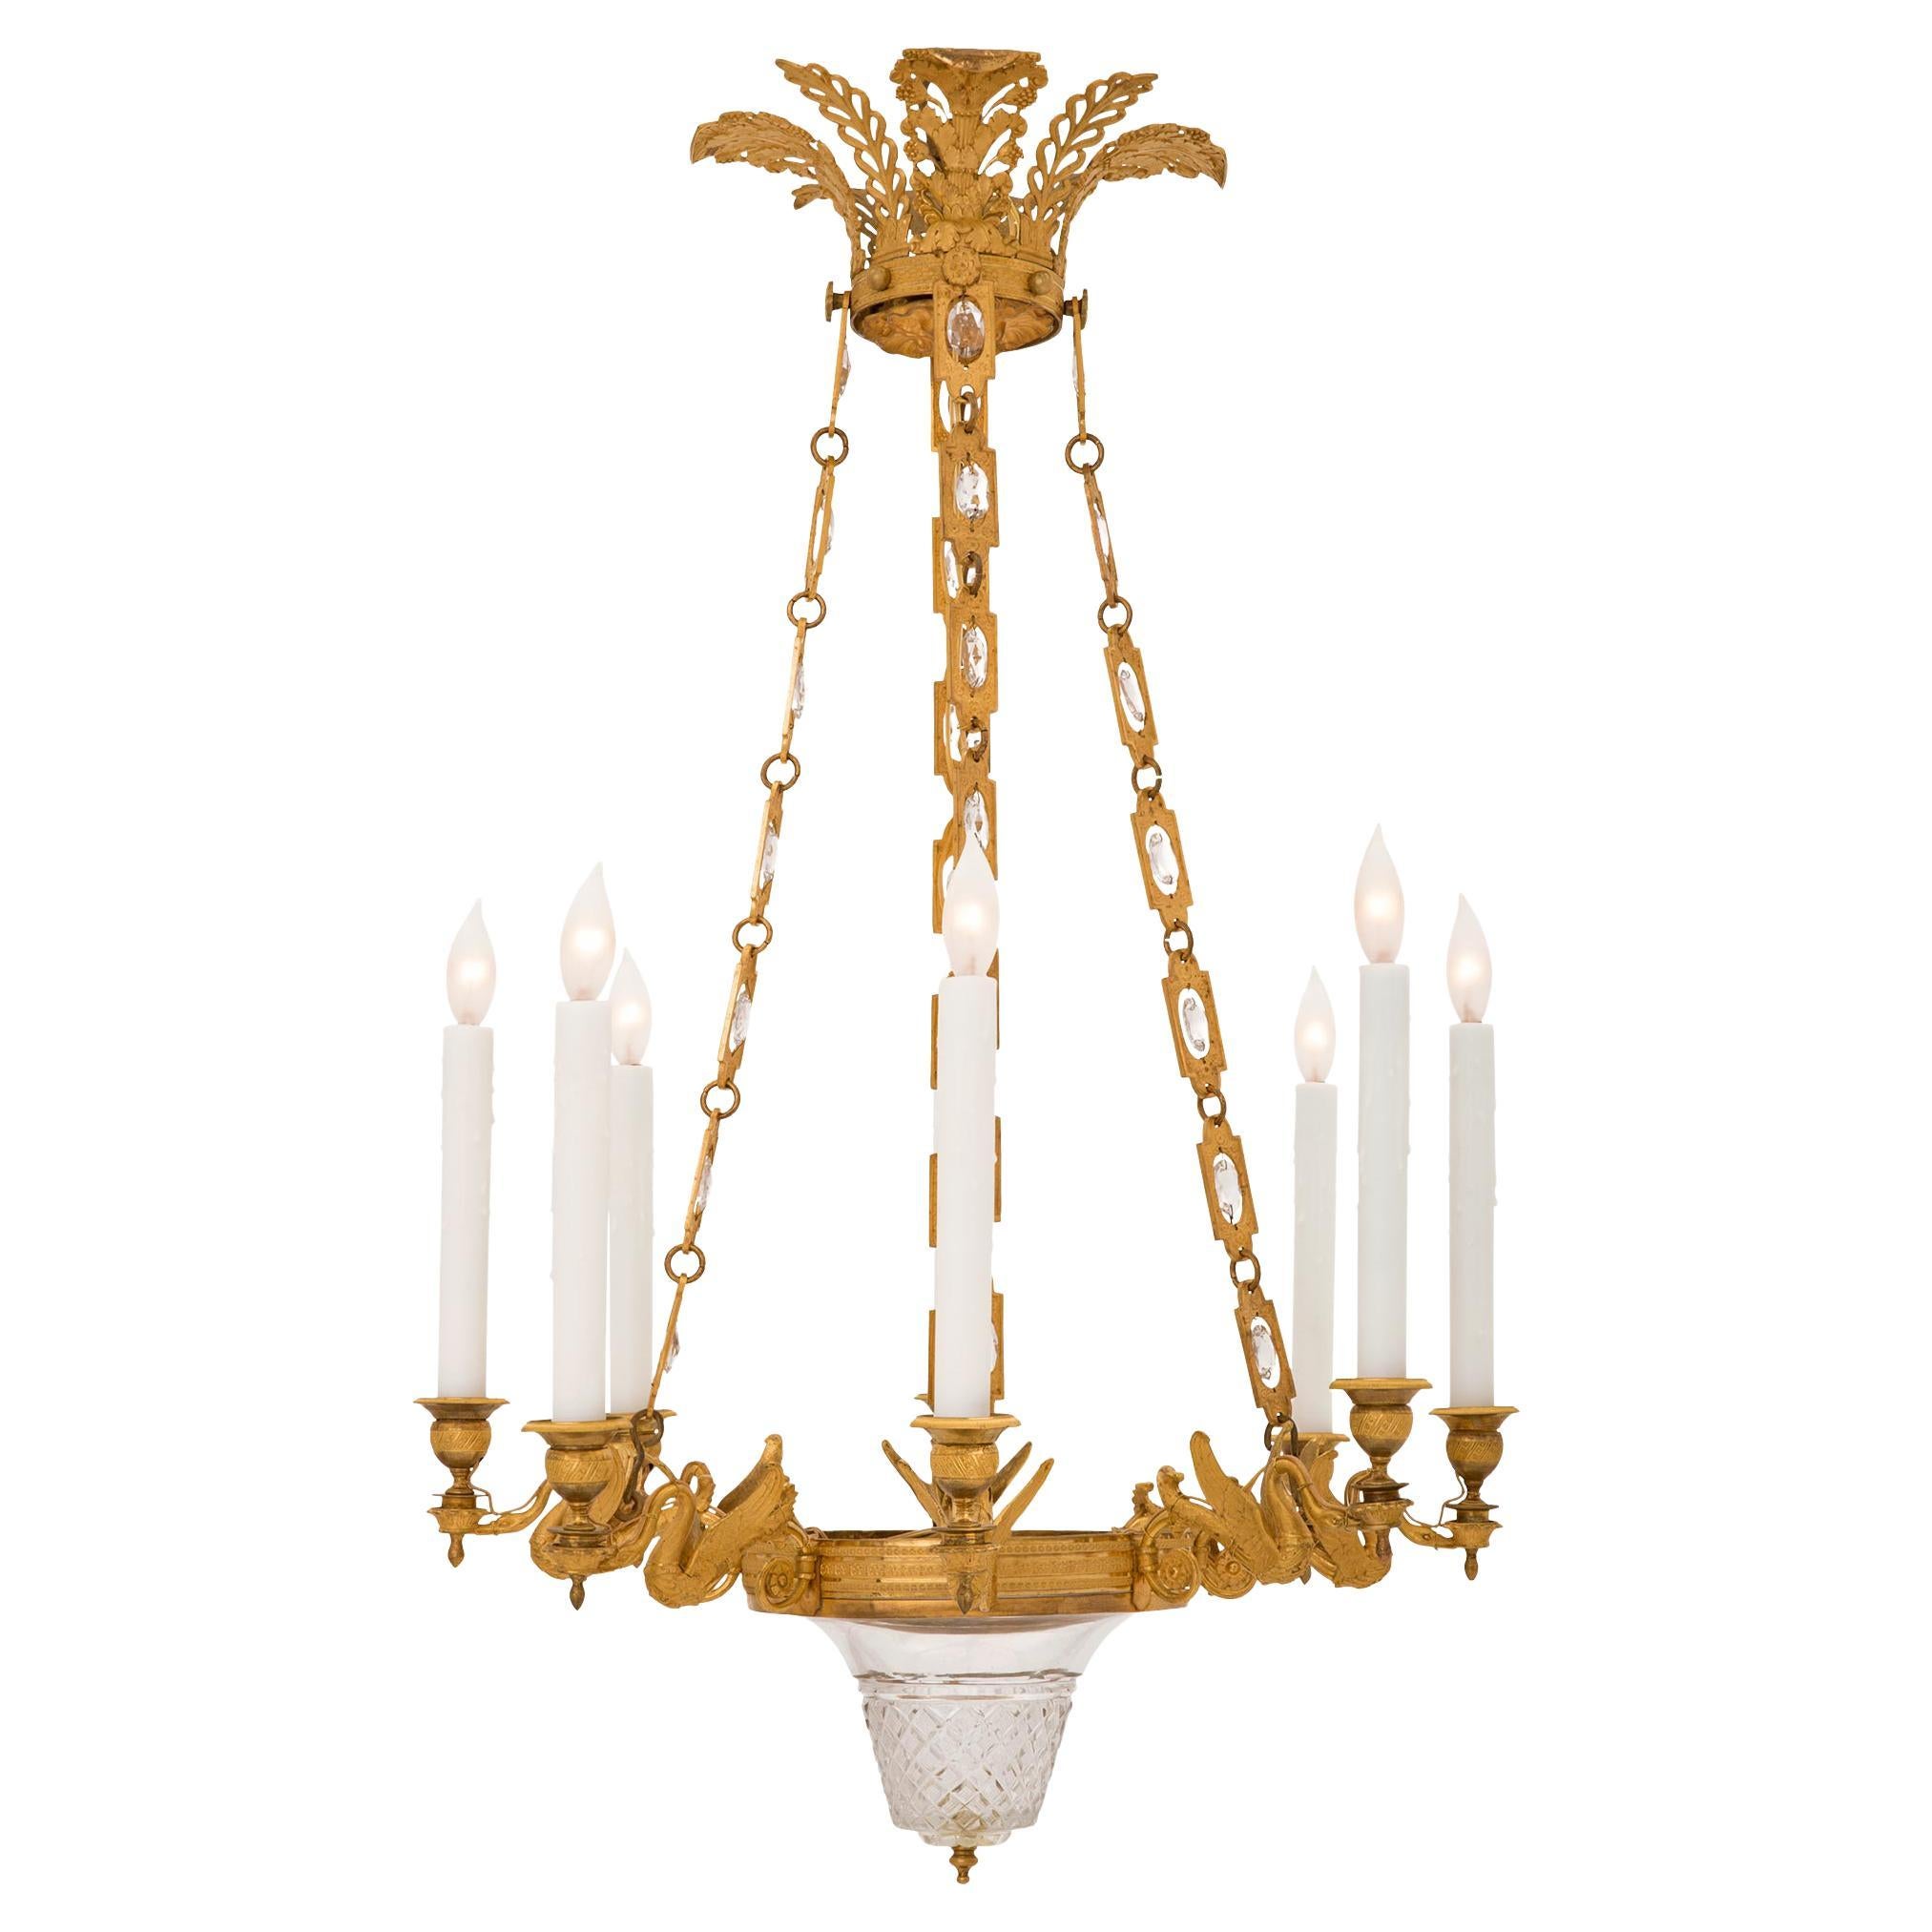 French Early 19th Century Empire Style Ormolu and Baccarat Crystal Chandelier For Sale